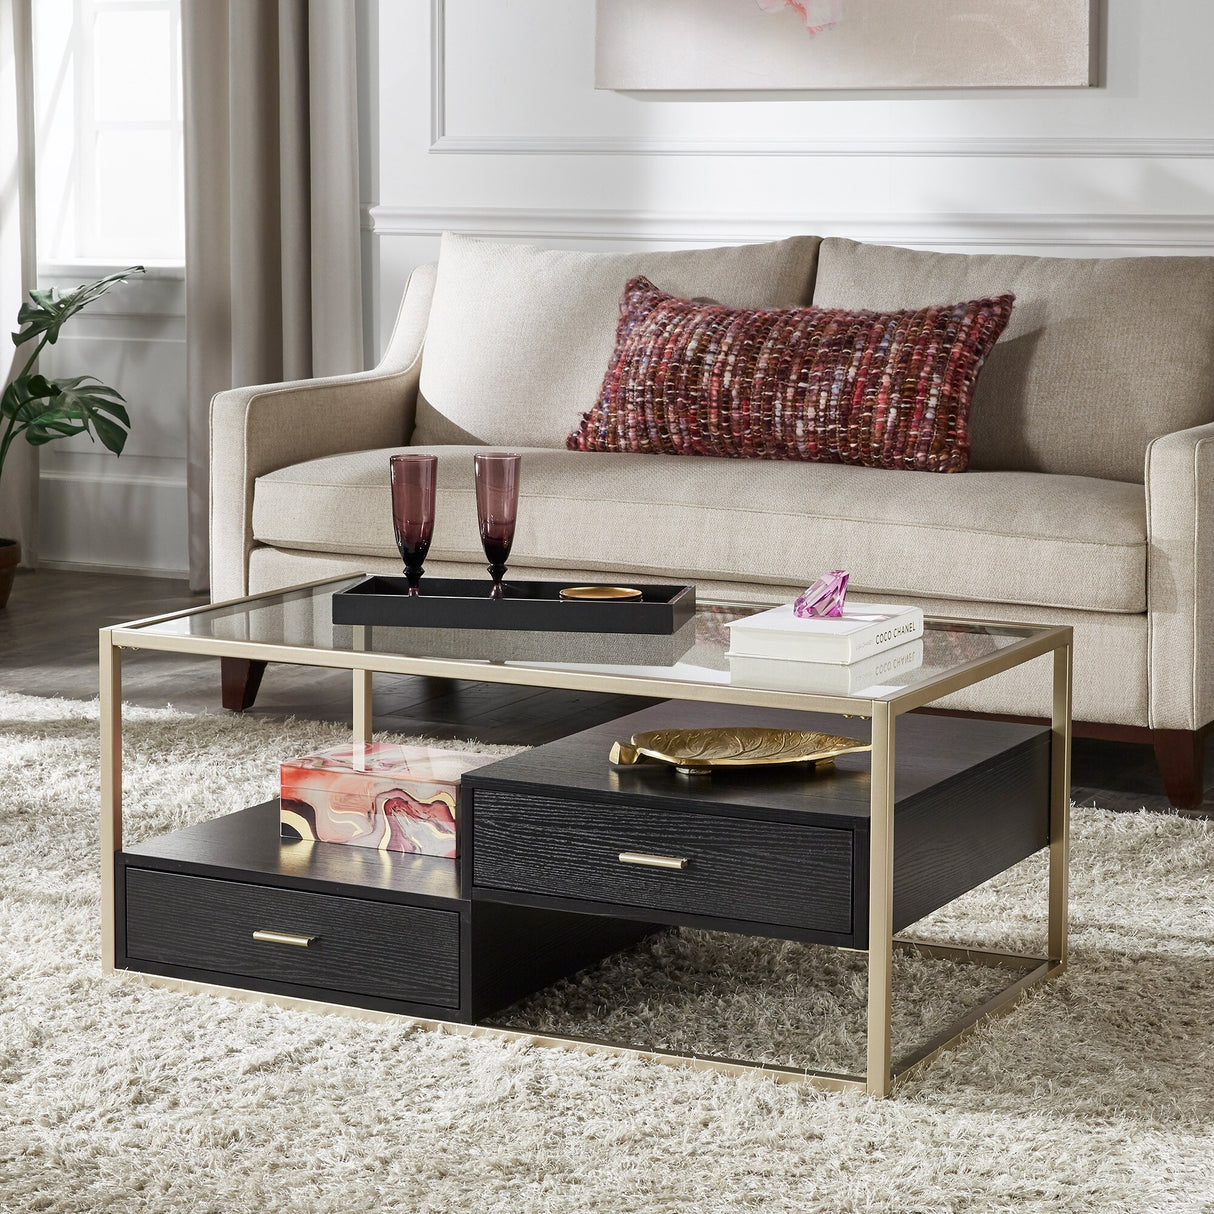 Spumante Champagne Silver Finish Table with Storage by iNSPIRE Q Bold